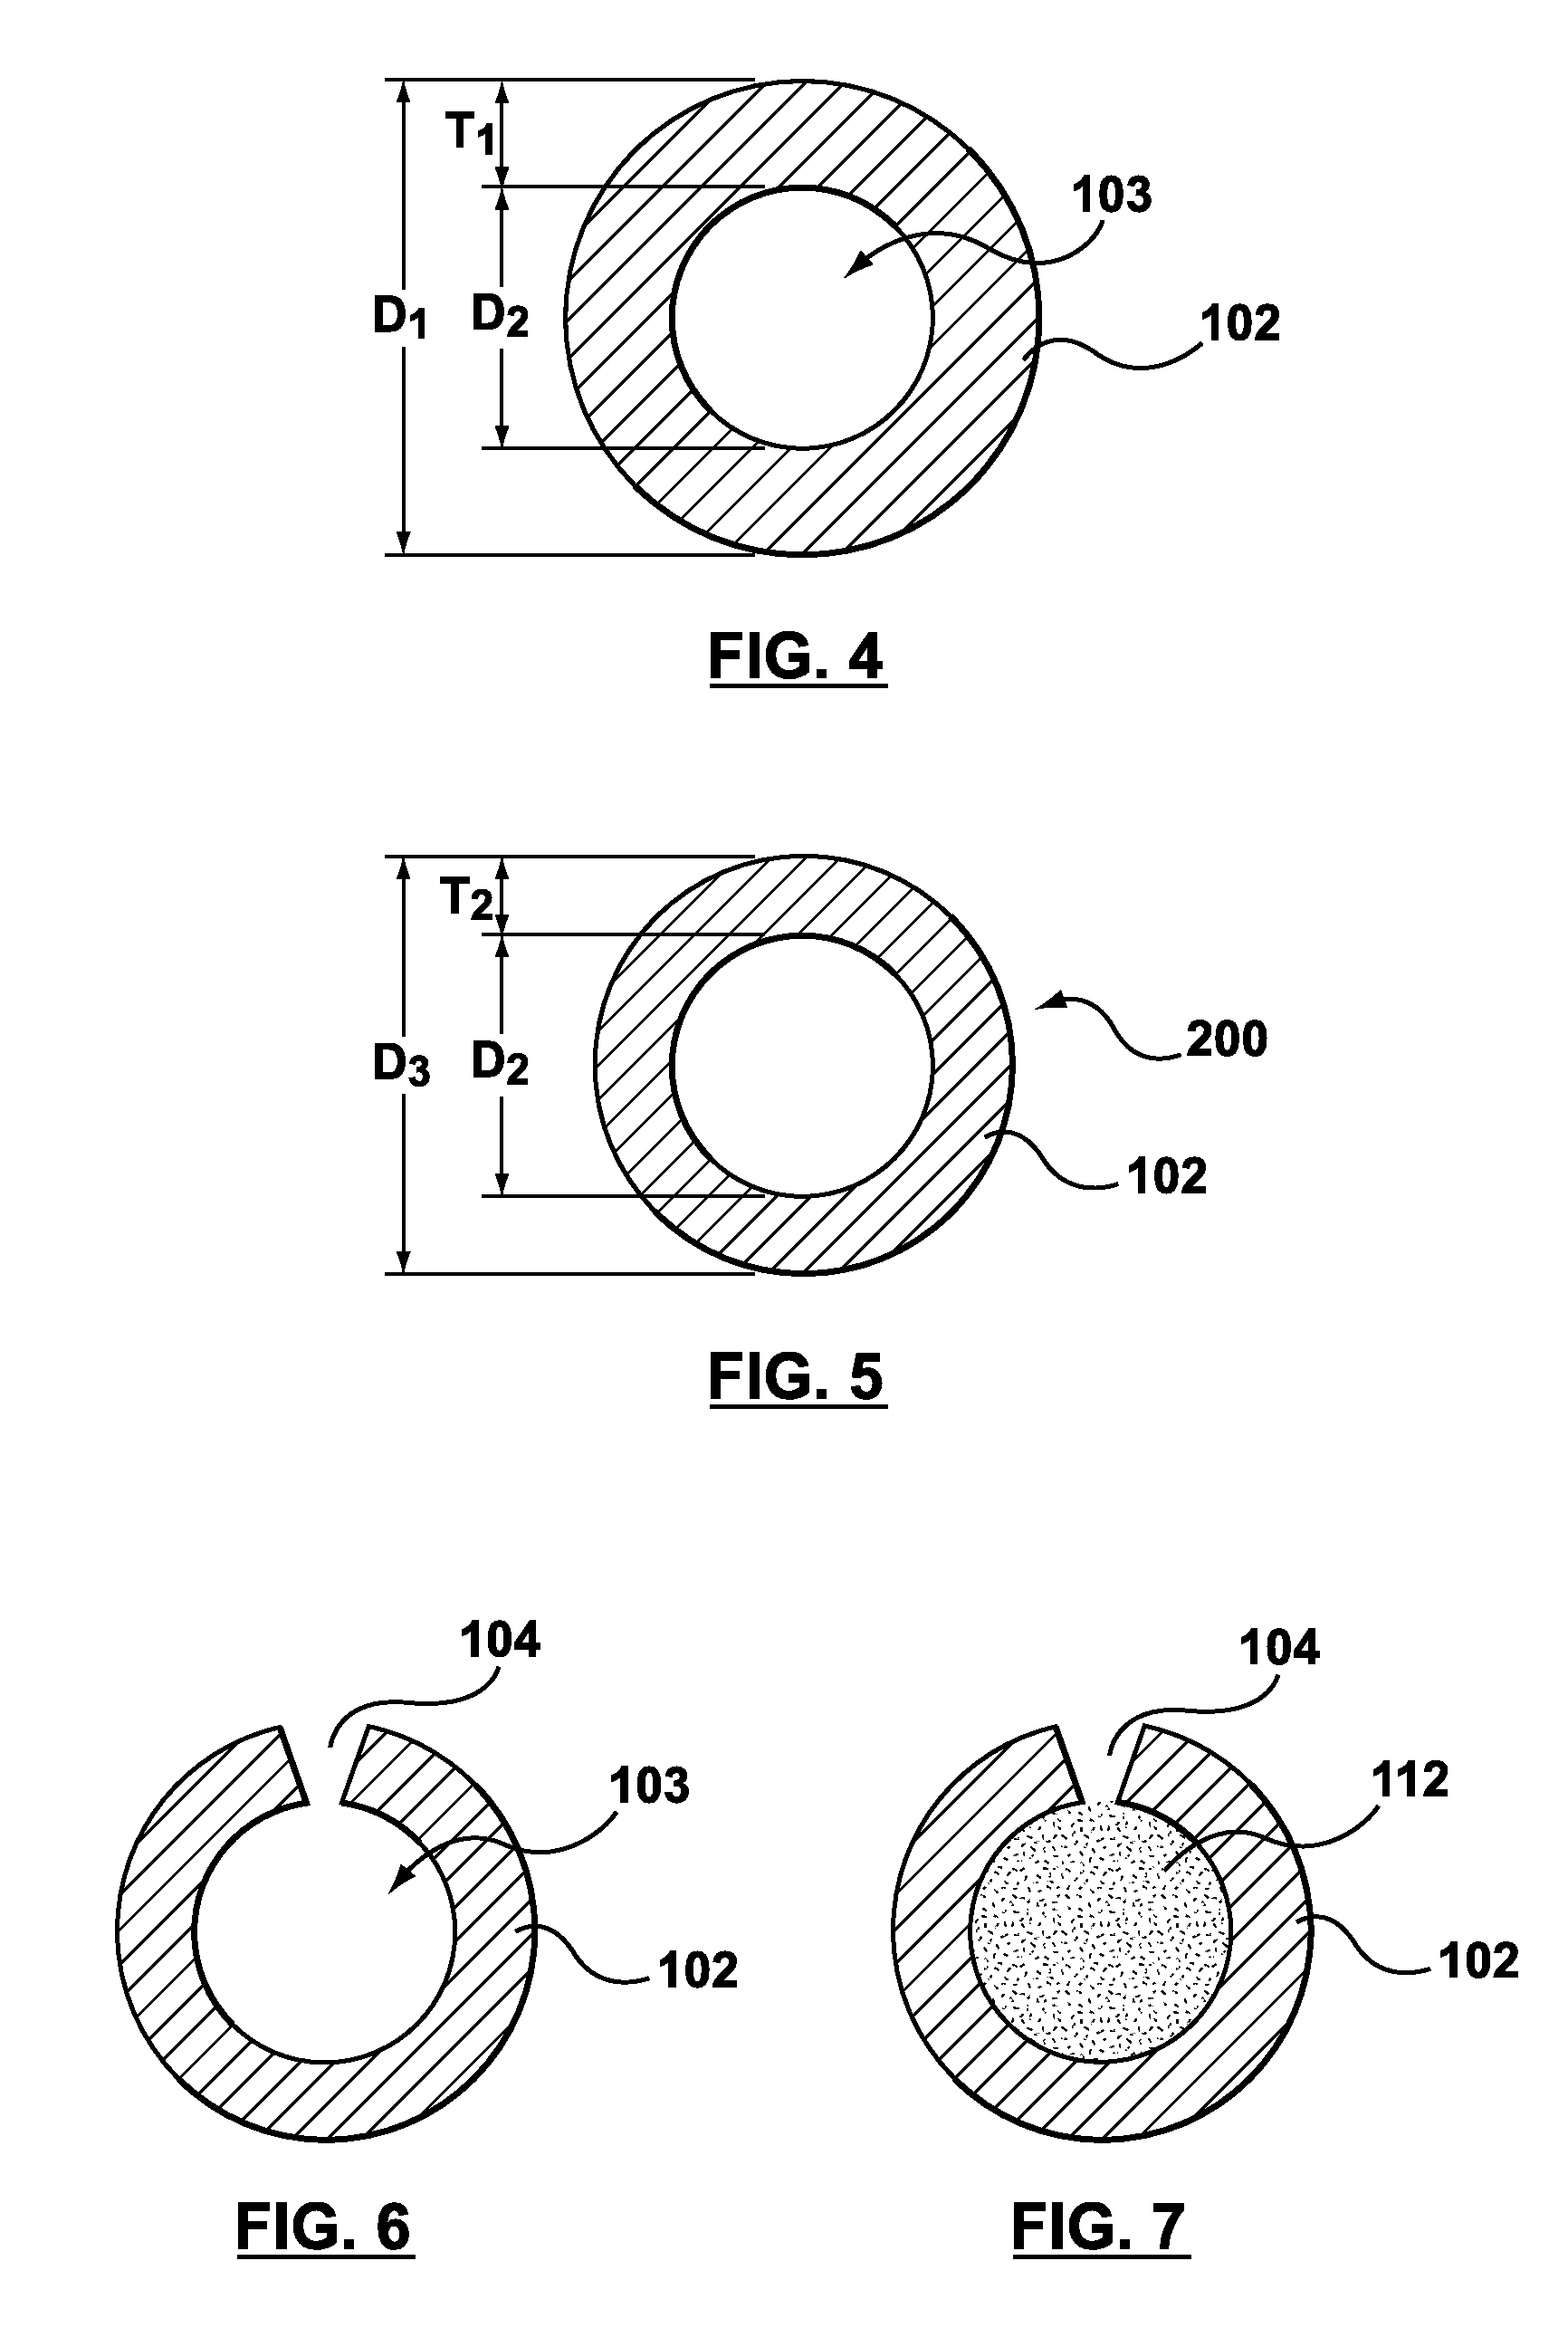 Method of forming hollow tubular drug eluting medical devices